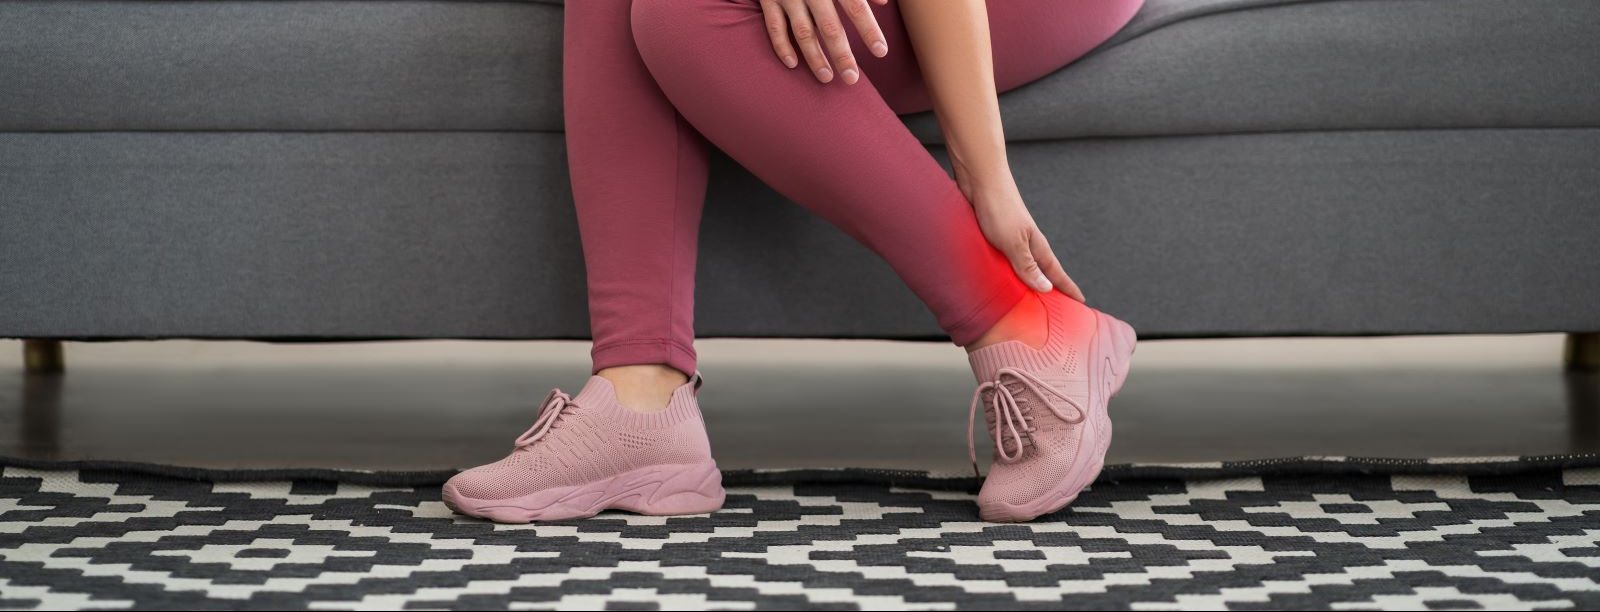 As Tiger Woods suffers from plantar fasciitis, learn more about this common condition which causes inflammation in the heel.